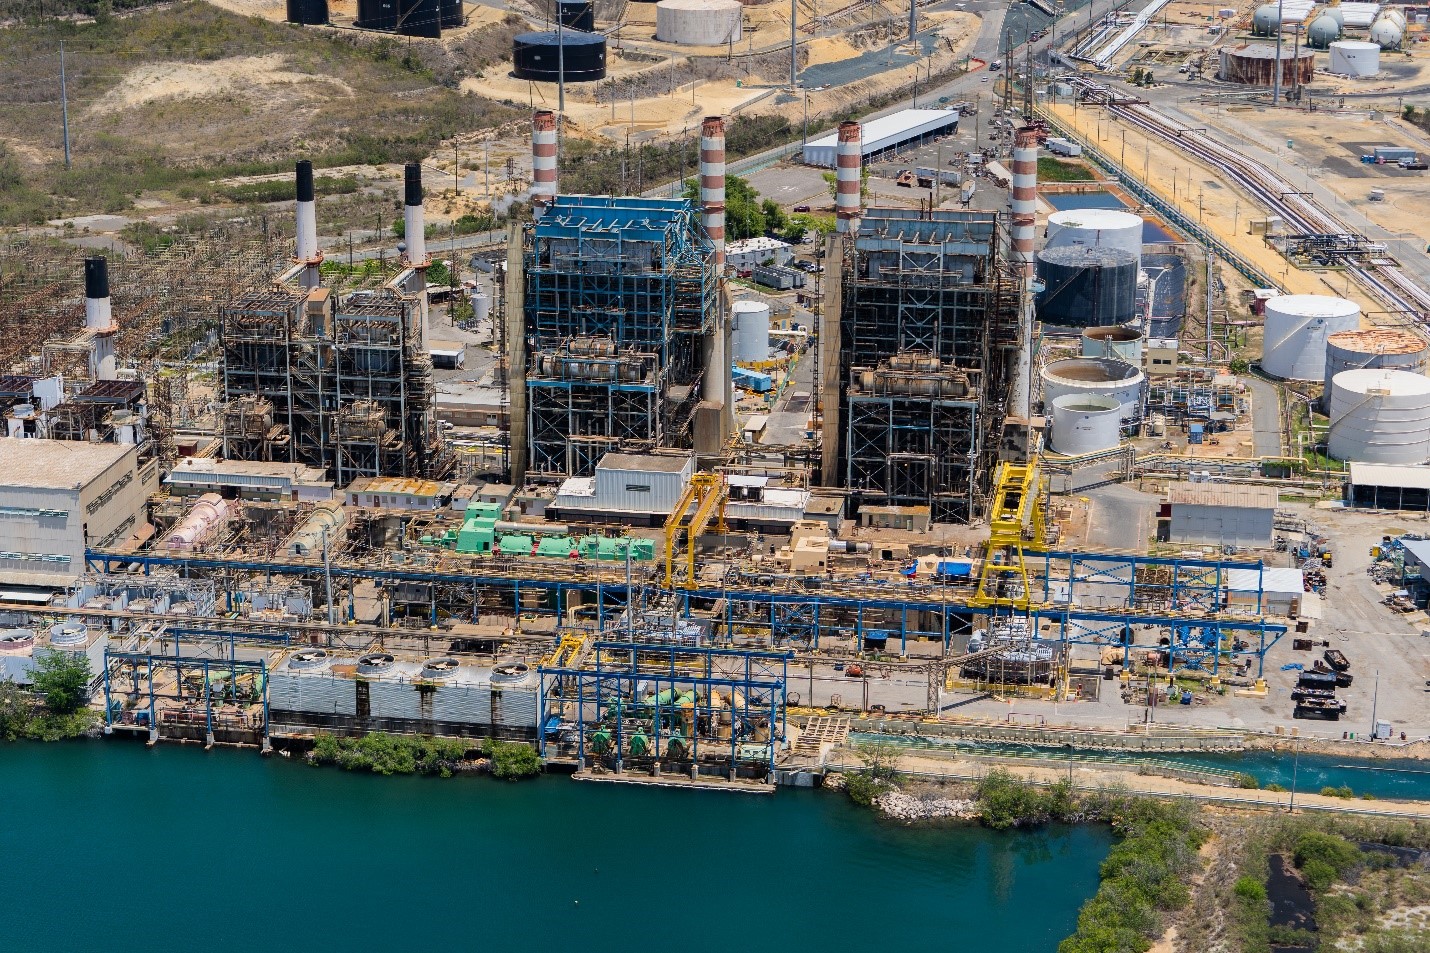 Aerial view of the Costa Sur Power plant in Guayanilla, PR.